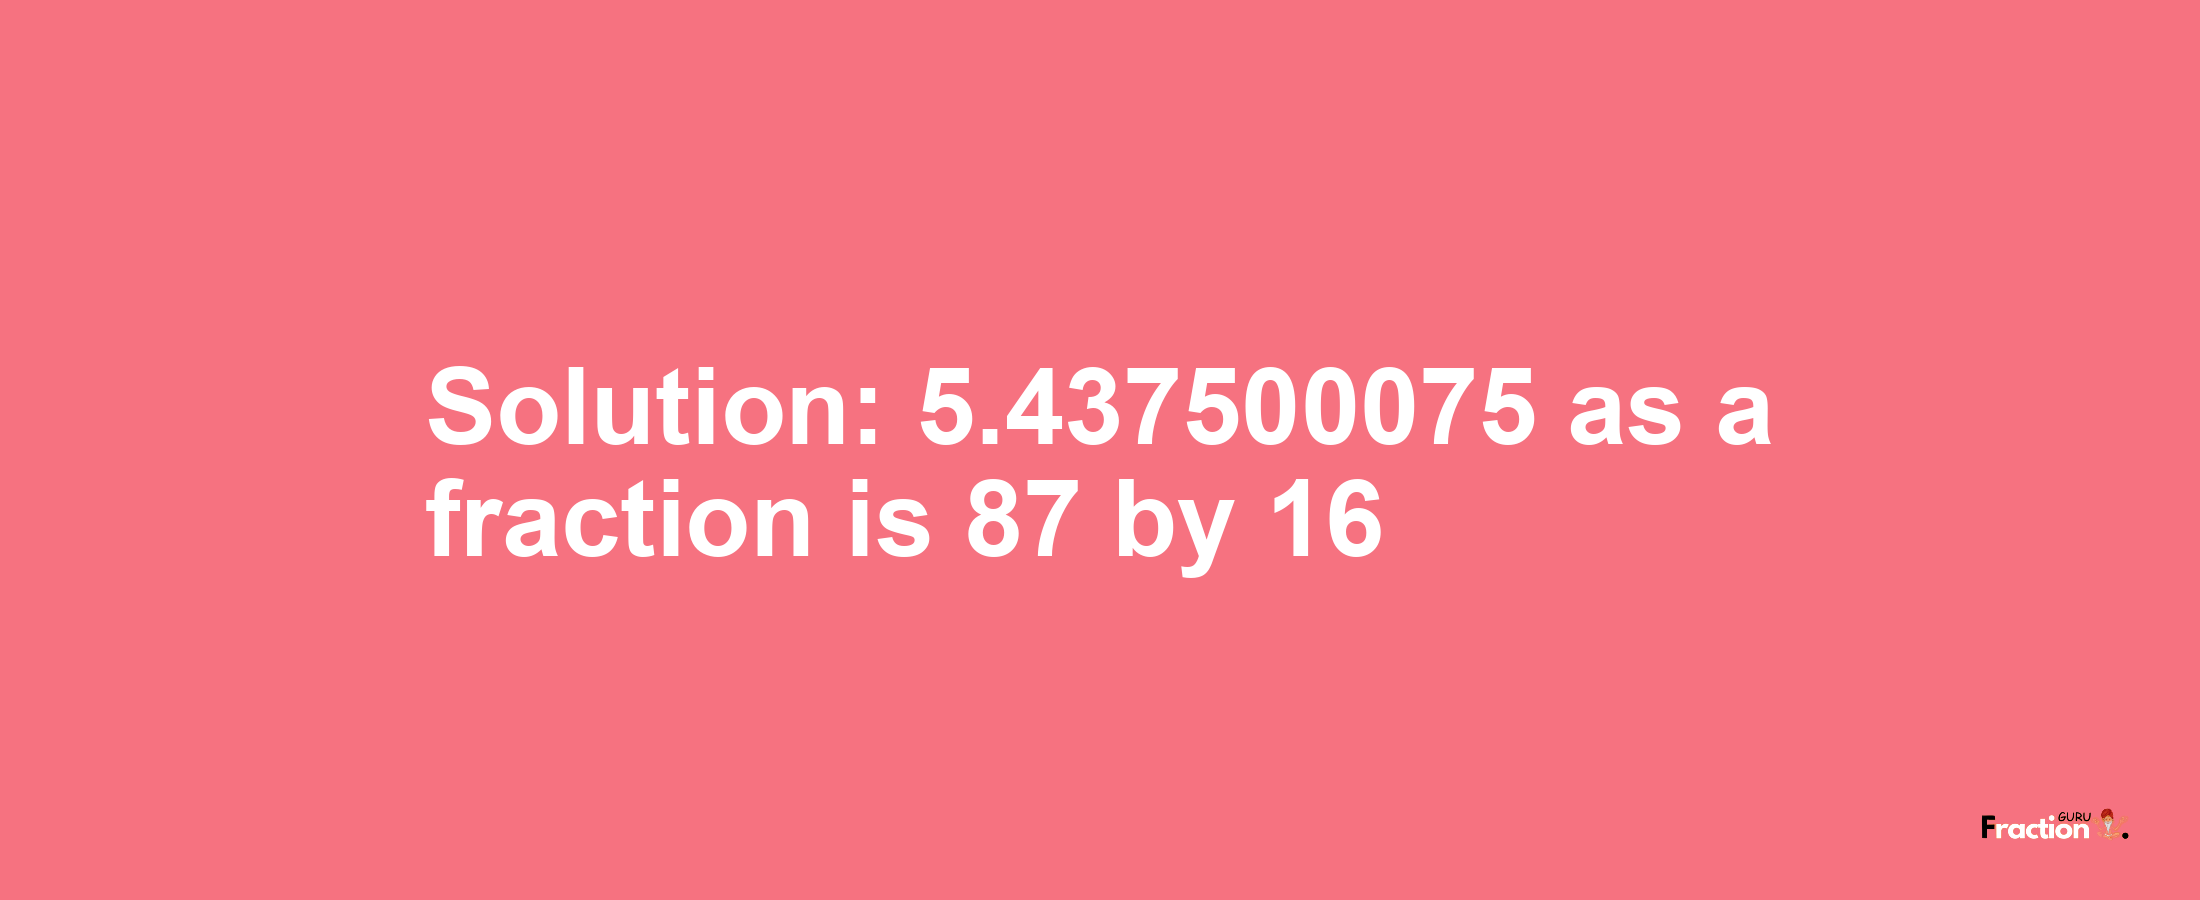 Solution:5.437500075 as a fraction is 87/16